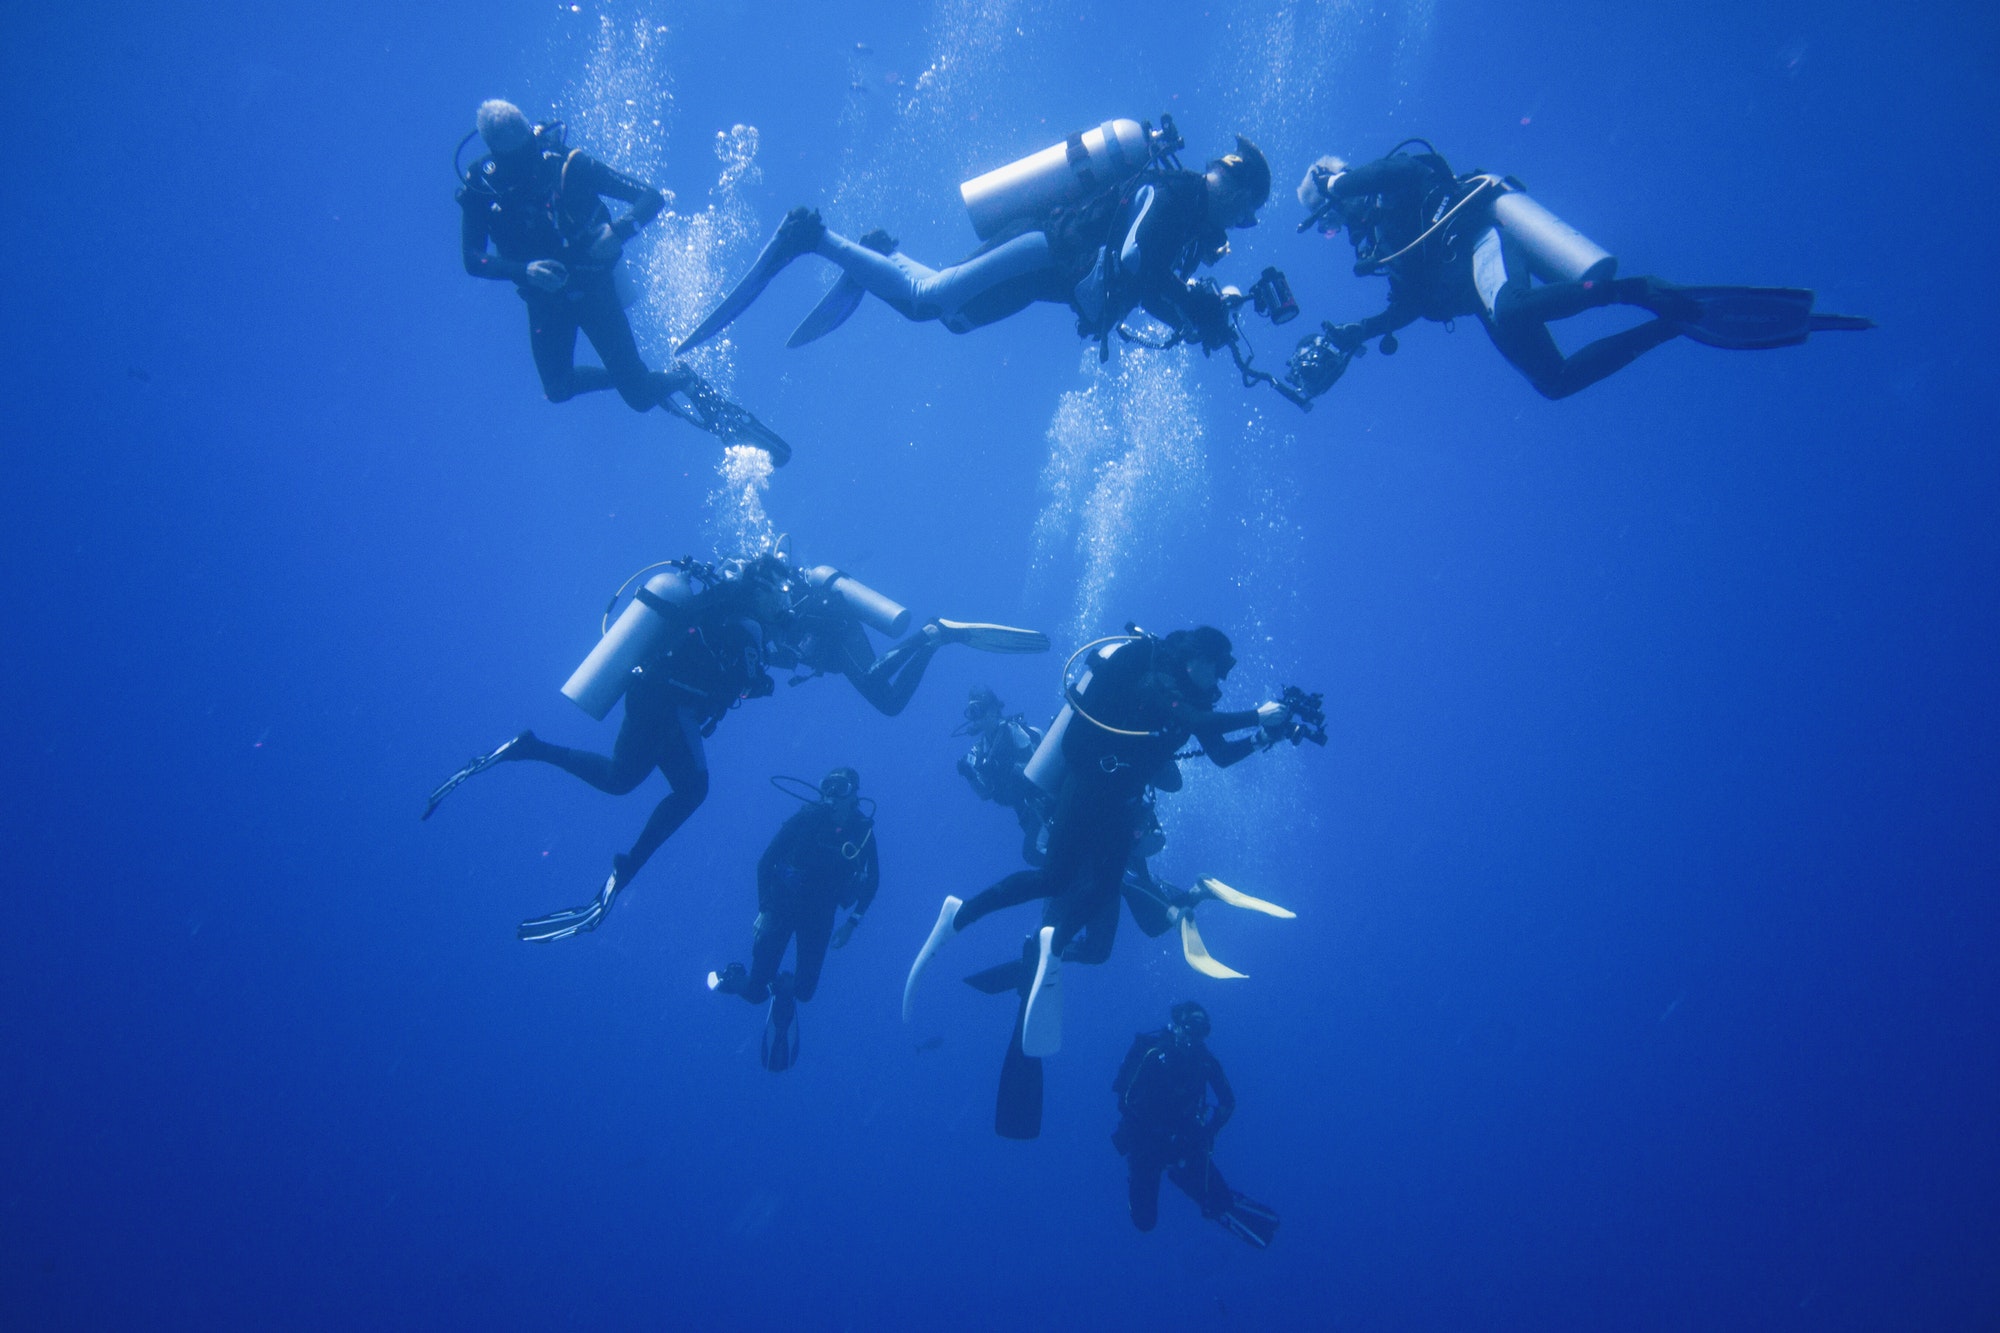 A group of scuba divers descending into infinite blue waters.